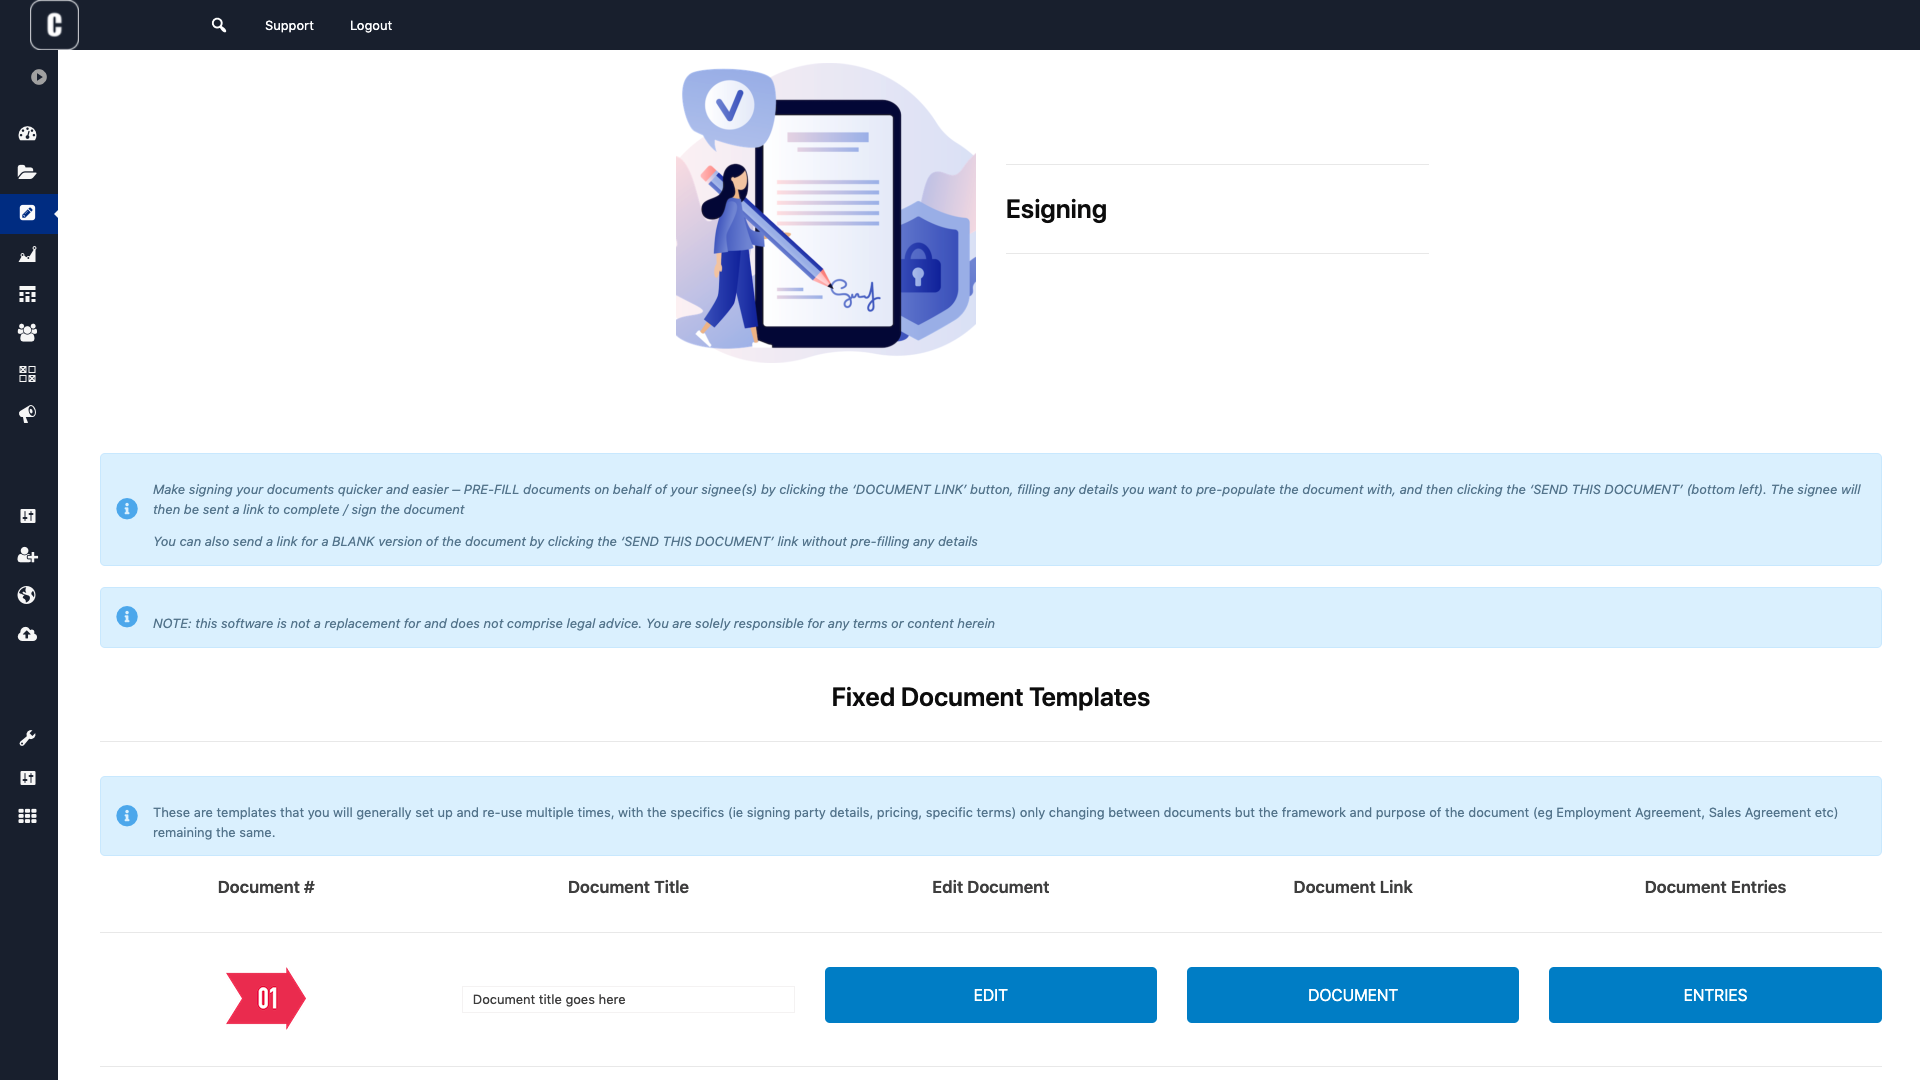 Esigning - with both Templates and Custom esigning documents, create up to 30 electronic signature templates to collect all signatures from all clients, across all areas - with highly customisable fields, options and more - the power of esigning is here